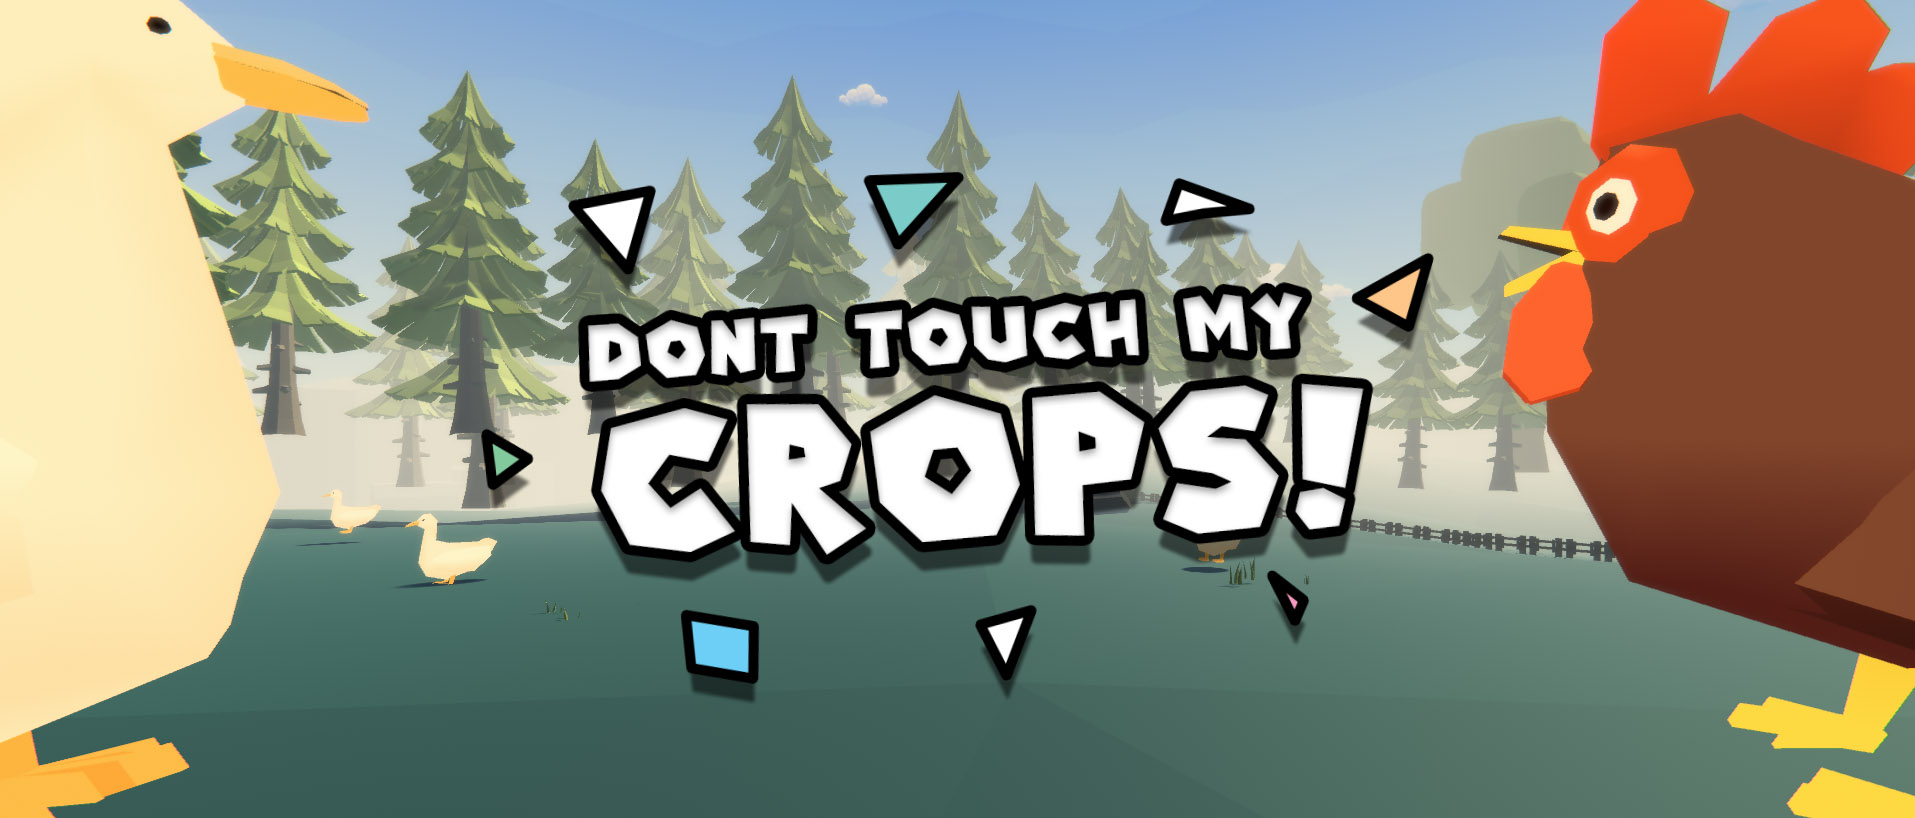 DONT TOUCH MY CROPS!